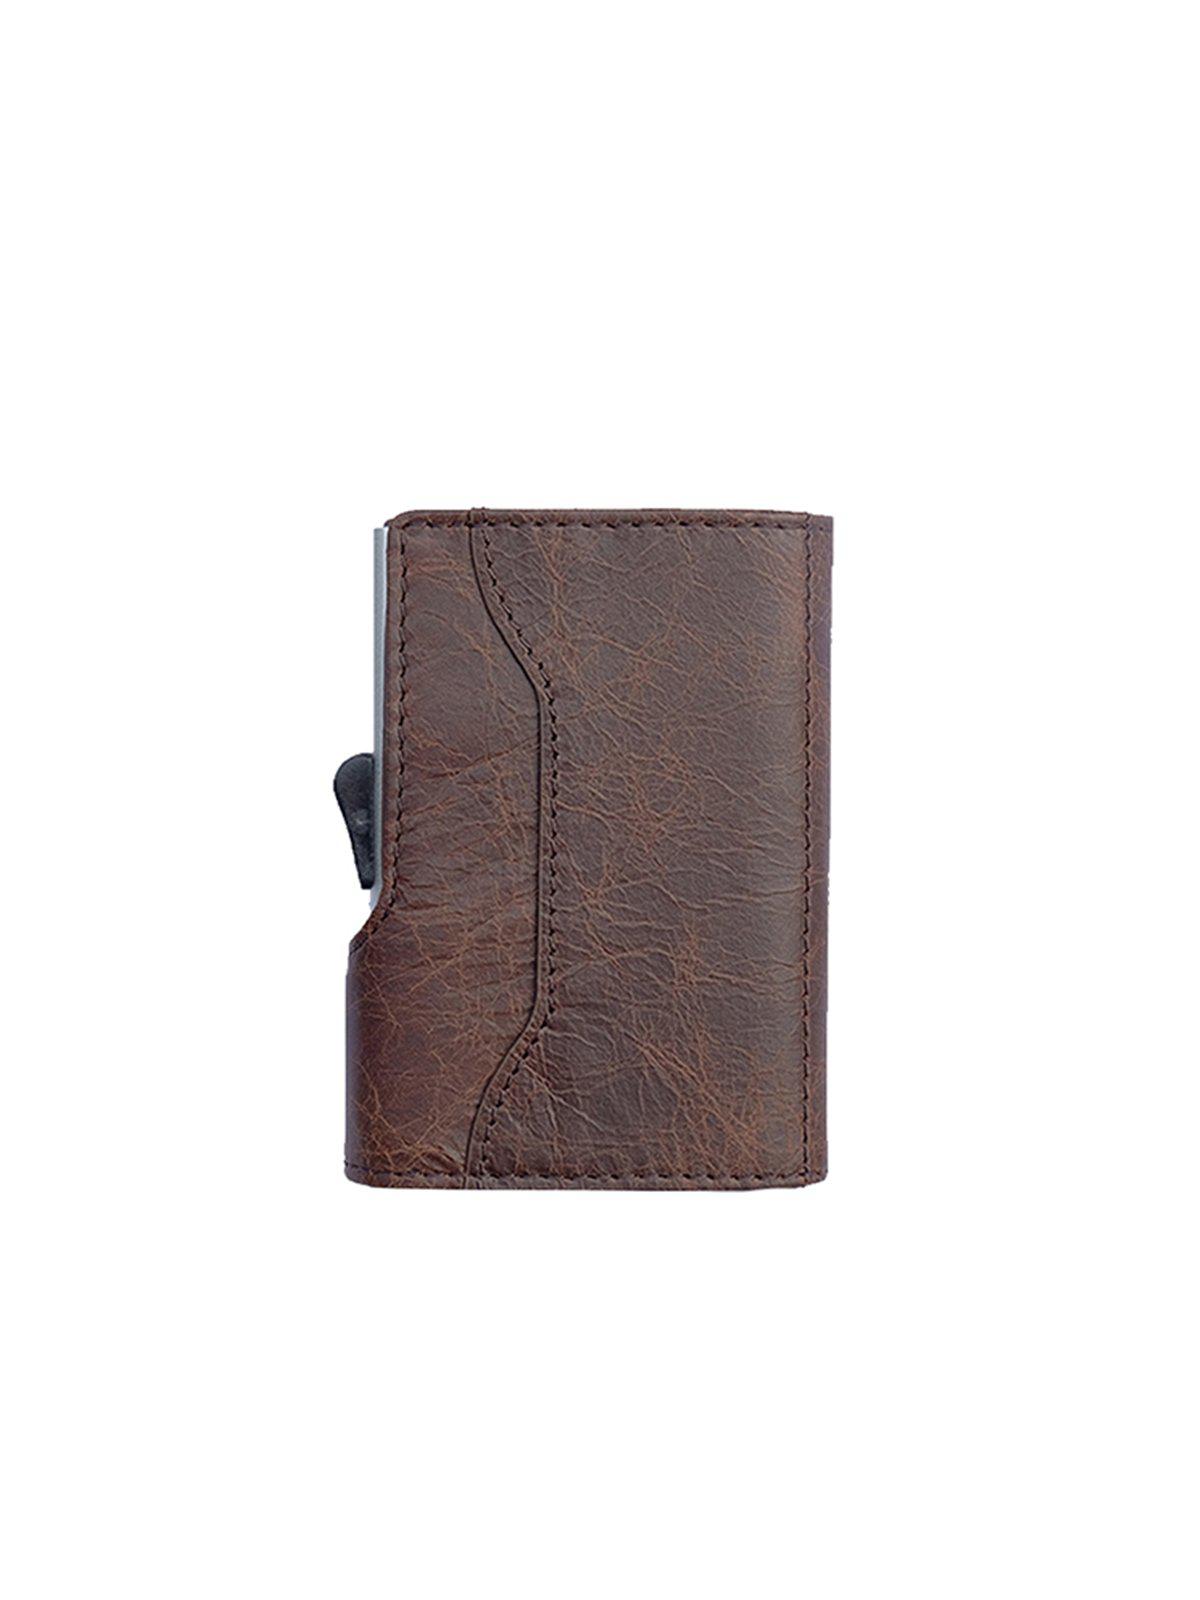 C-Secure Italian Leather RFID Wallet Dark Brown - MORE by Morello Indonesia